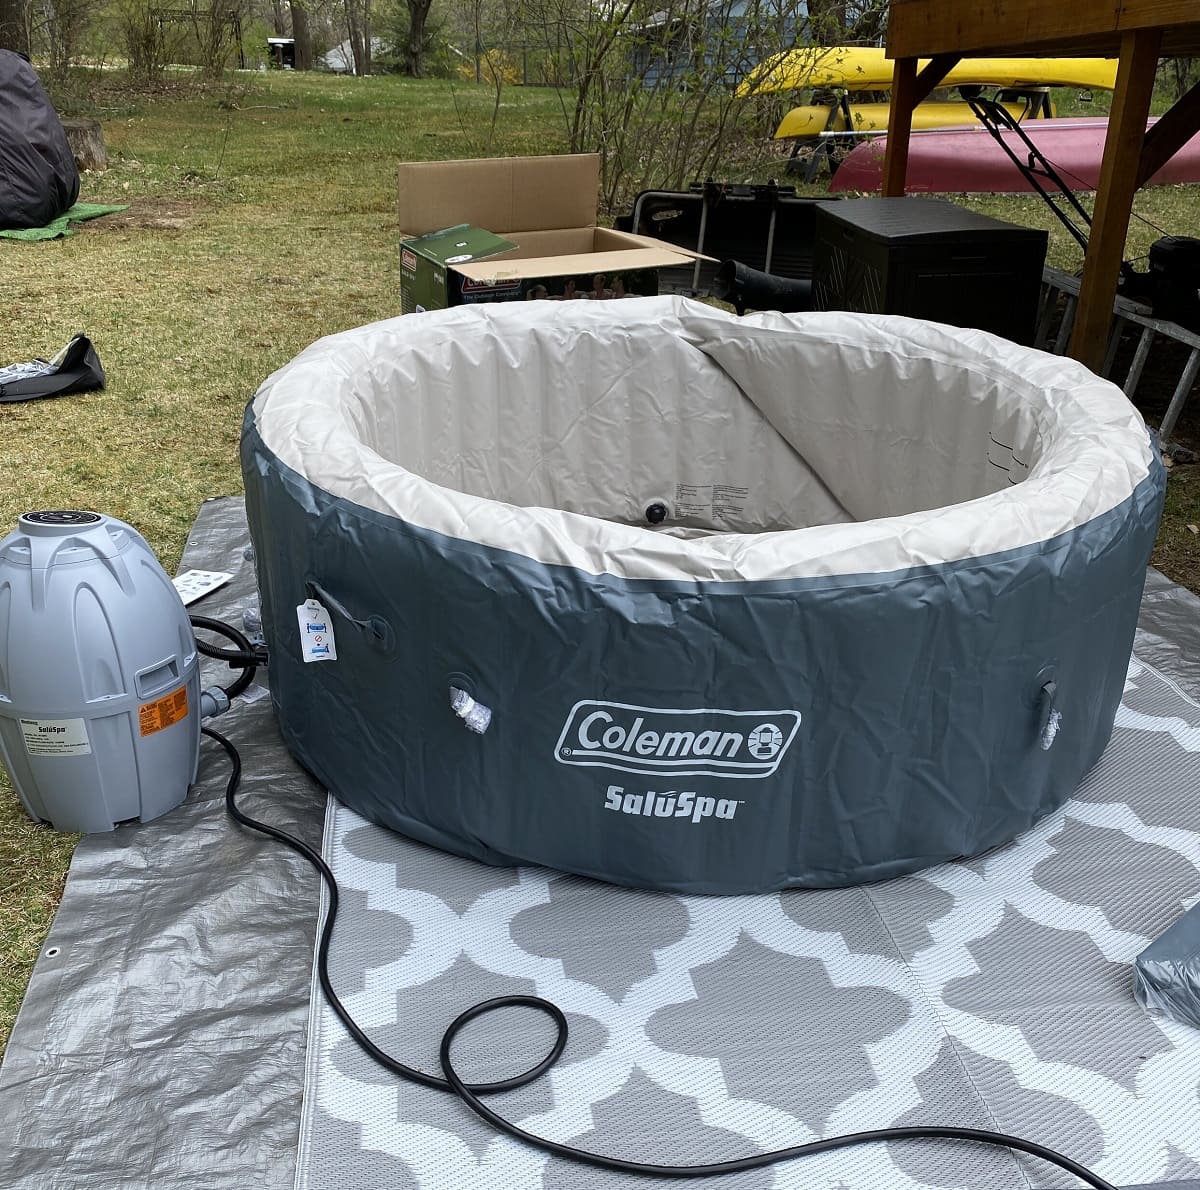 How To Care For Inflatable Hot Tub